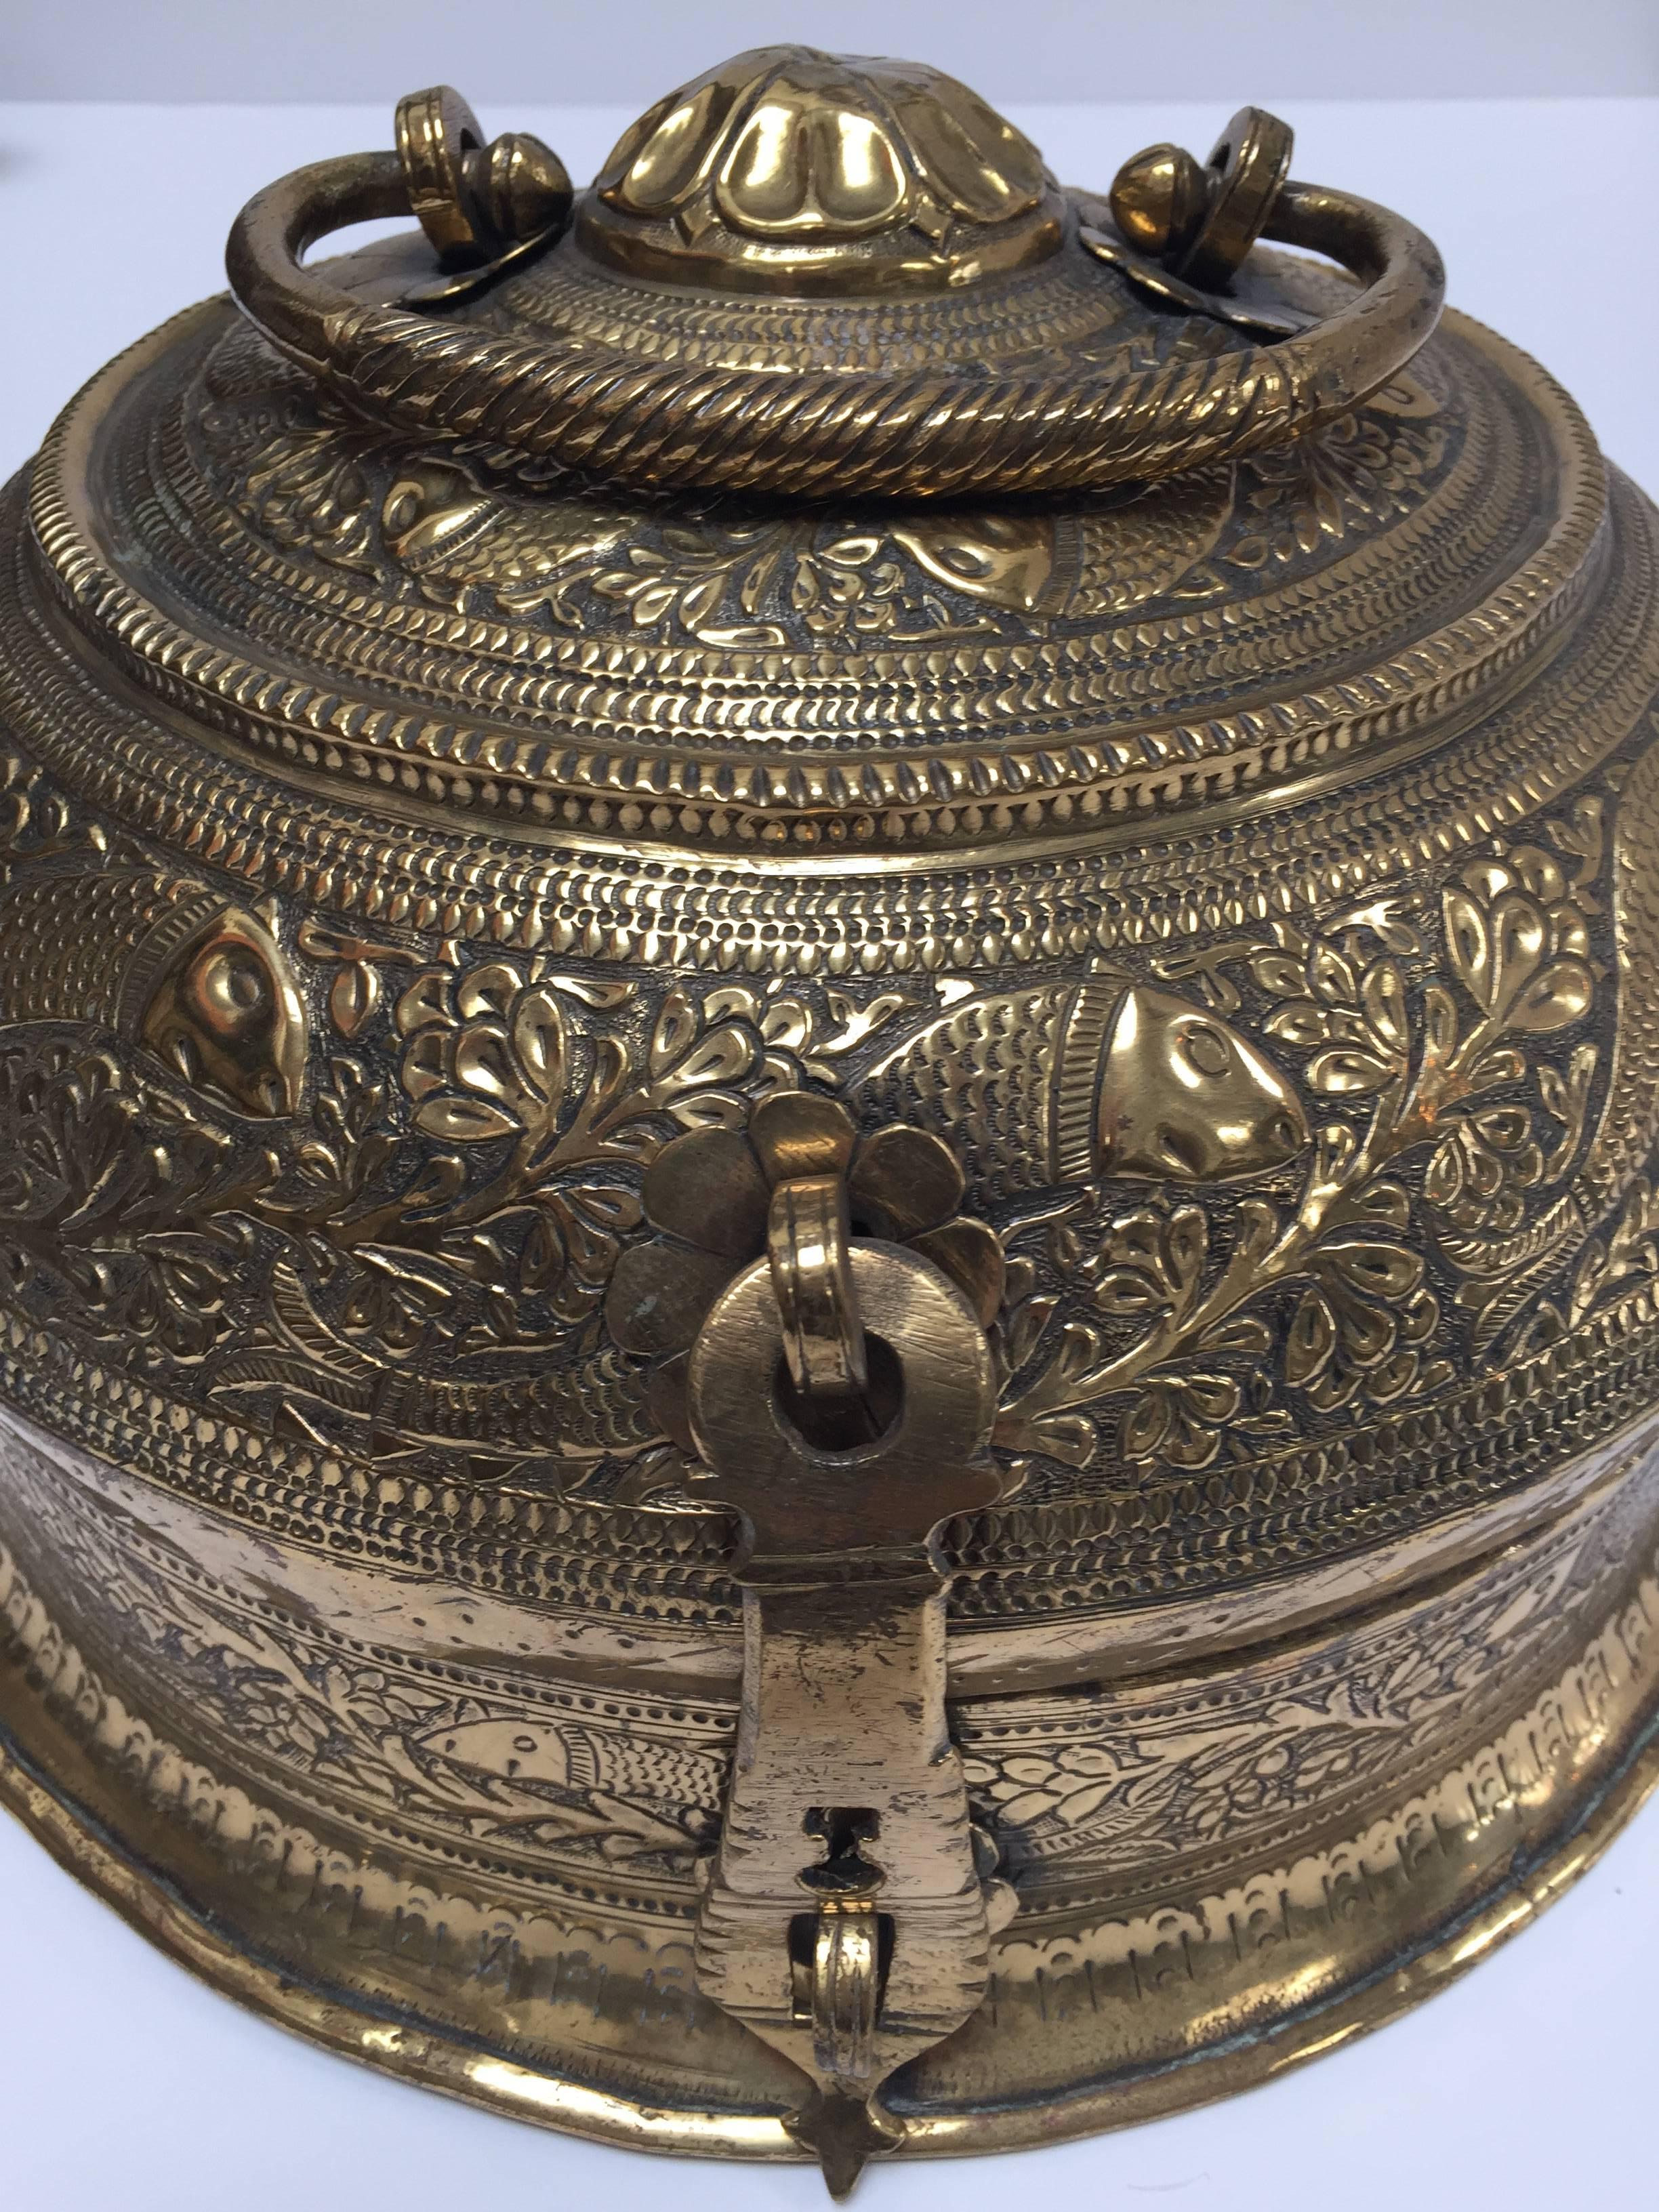 Beautiful 19th century large hand-crafted decorative round polished brass box with lid delicately and intricately hand-hammered with repousse floral and fishes designs.
Engraved with intricate designs on the lid which has a carved floral design